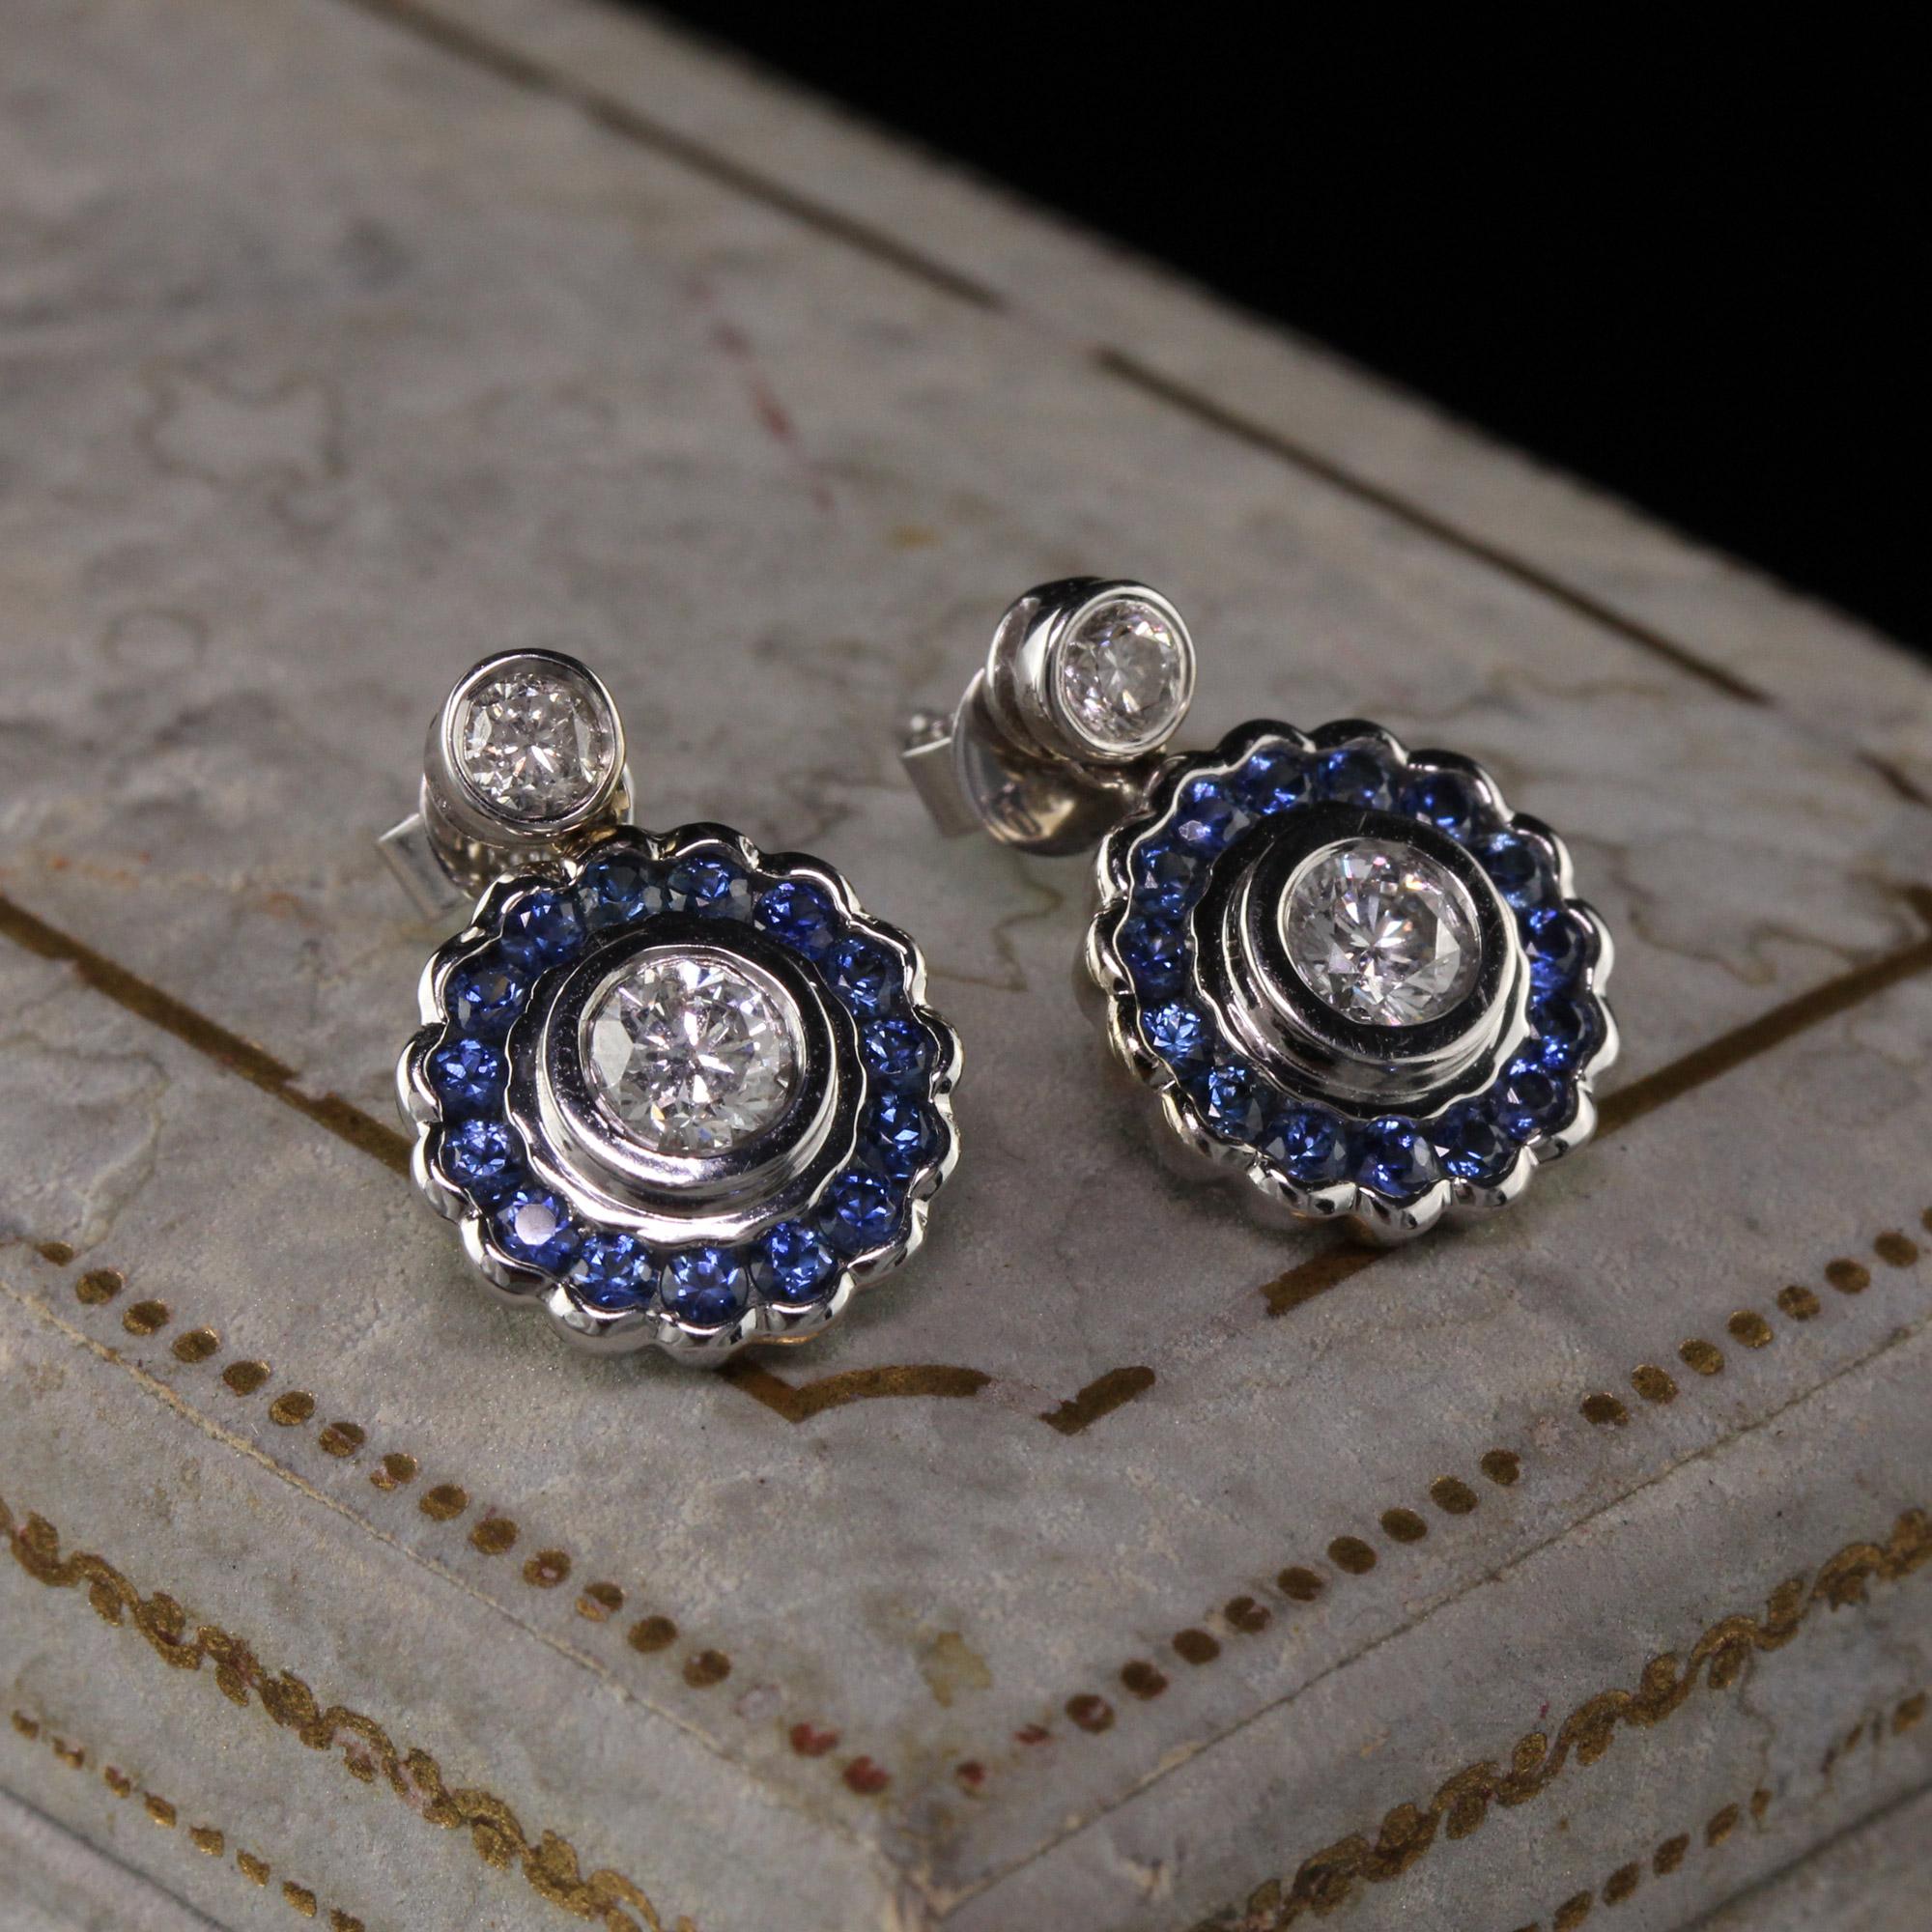 Dazzling vintage estate diamond earrings with sapphire halo.

Metal: 18K White Gold

Weight: 4.4 Grams

Diamond Weight: Approximately 0.70 ct

Diamond Color: H

Diamond Clarity: SI1

Gemstone Weight: Approximately 0.50 ct

Measurements: 0.60 x 0.45